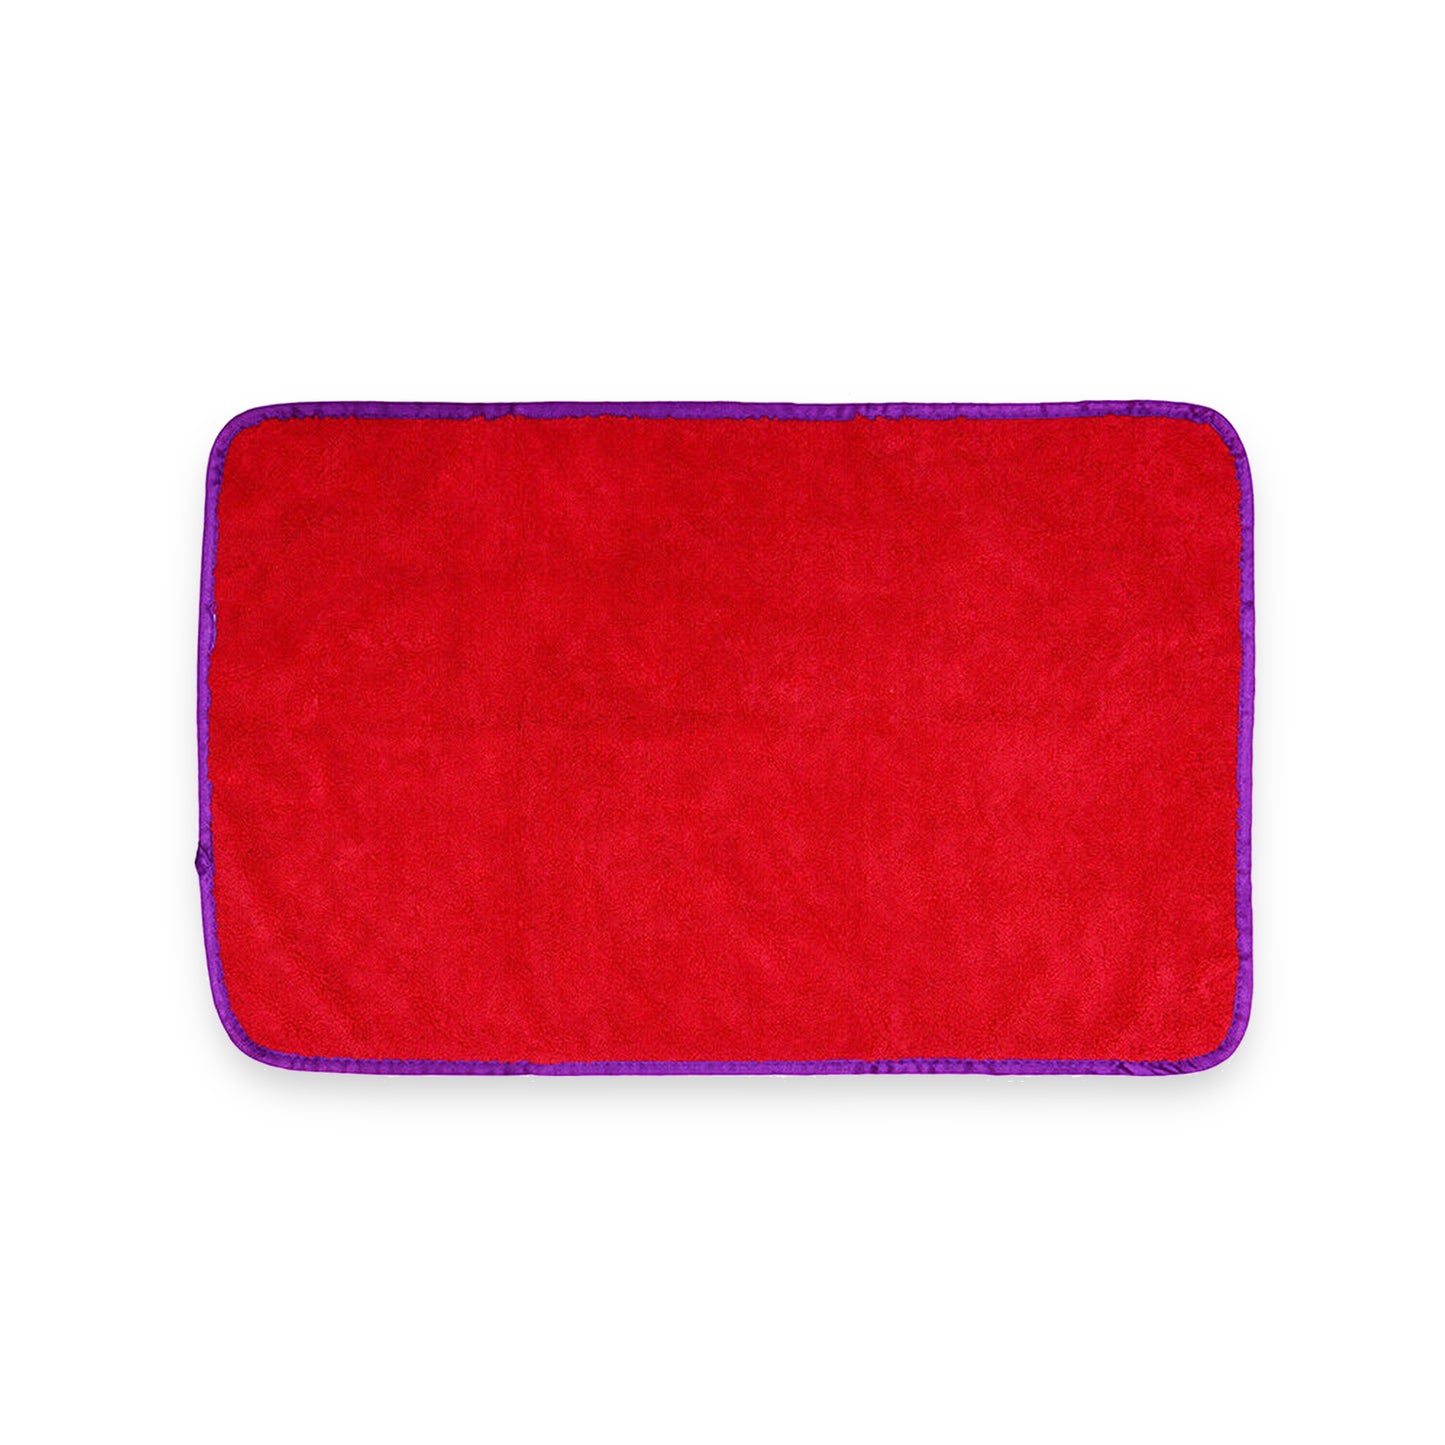 ImportWorx Premium Large Red MicroFiber High Absorber Towels 16" x 24"